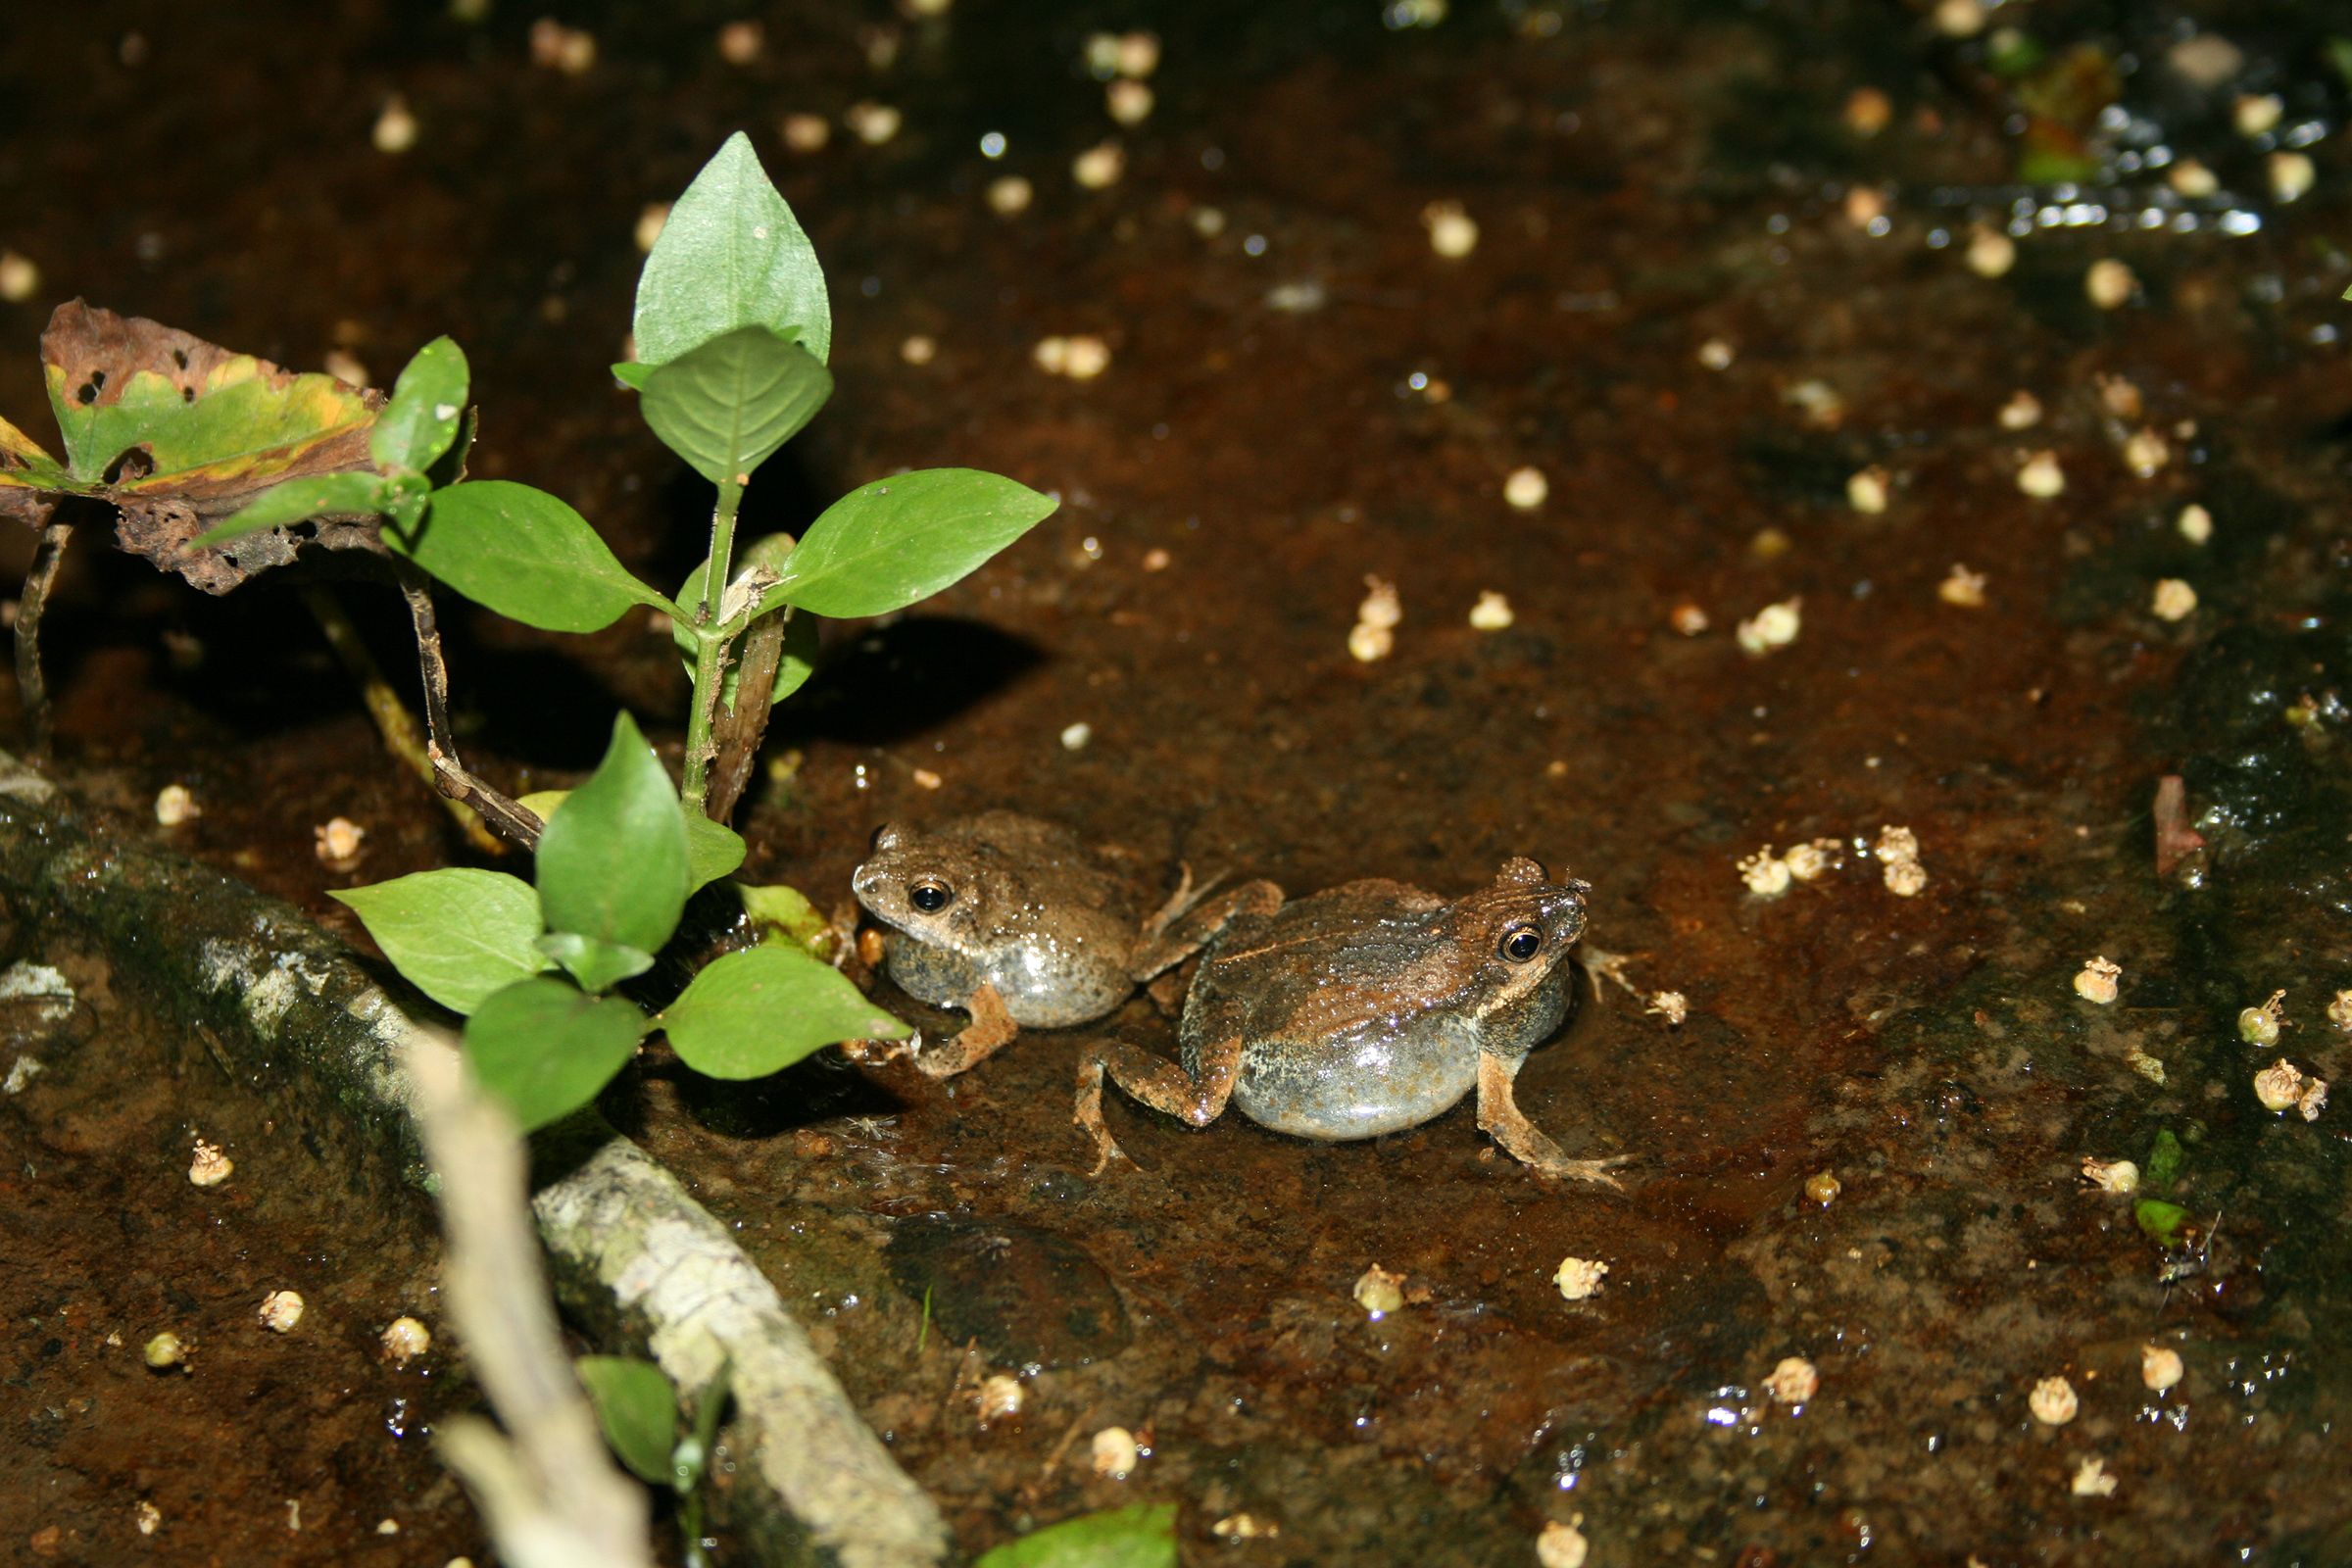 Two frogs sitting on moist ground